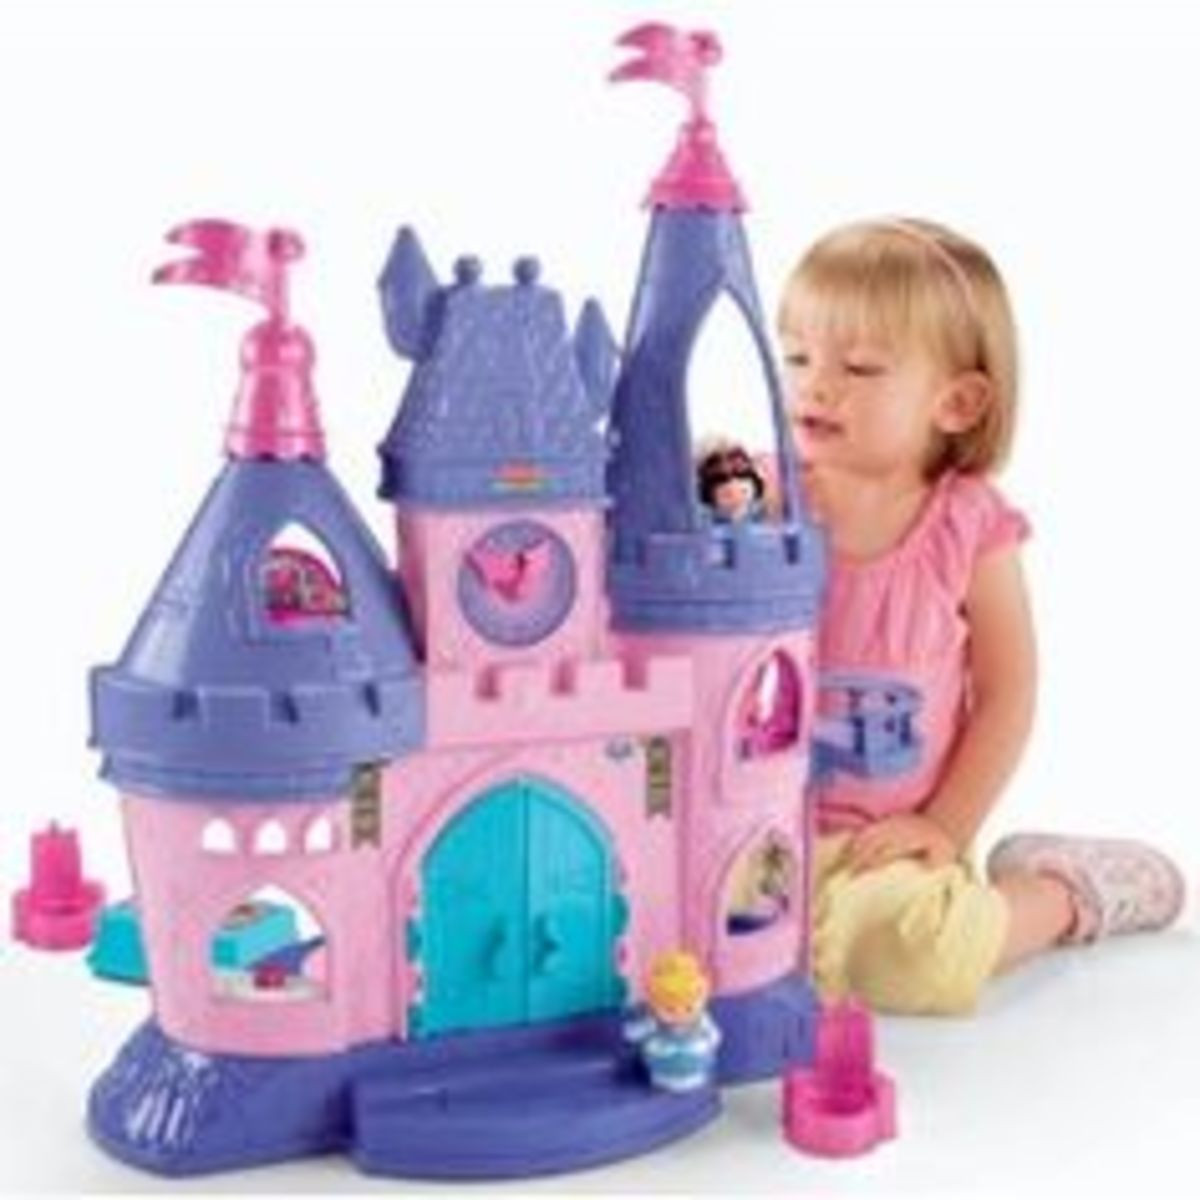 Christmas Gift Ideas For 2 Year Old Girl
 Best Christmas Gift Ideas For A 2 Year Old Baby Girl